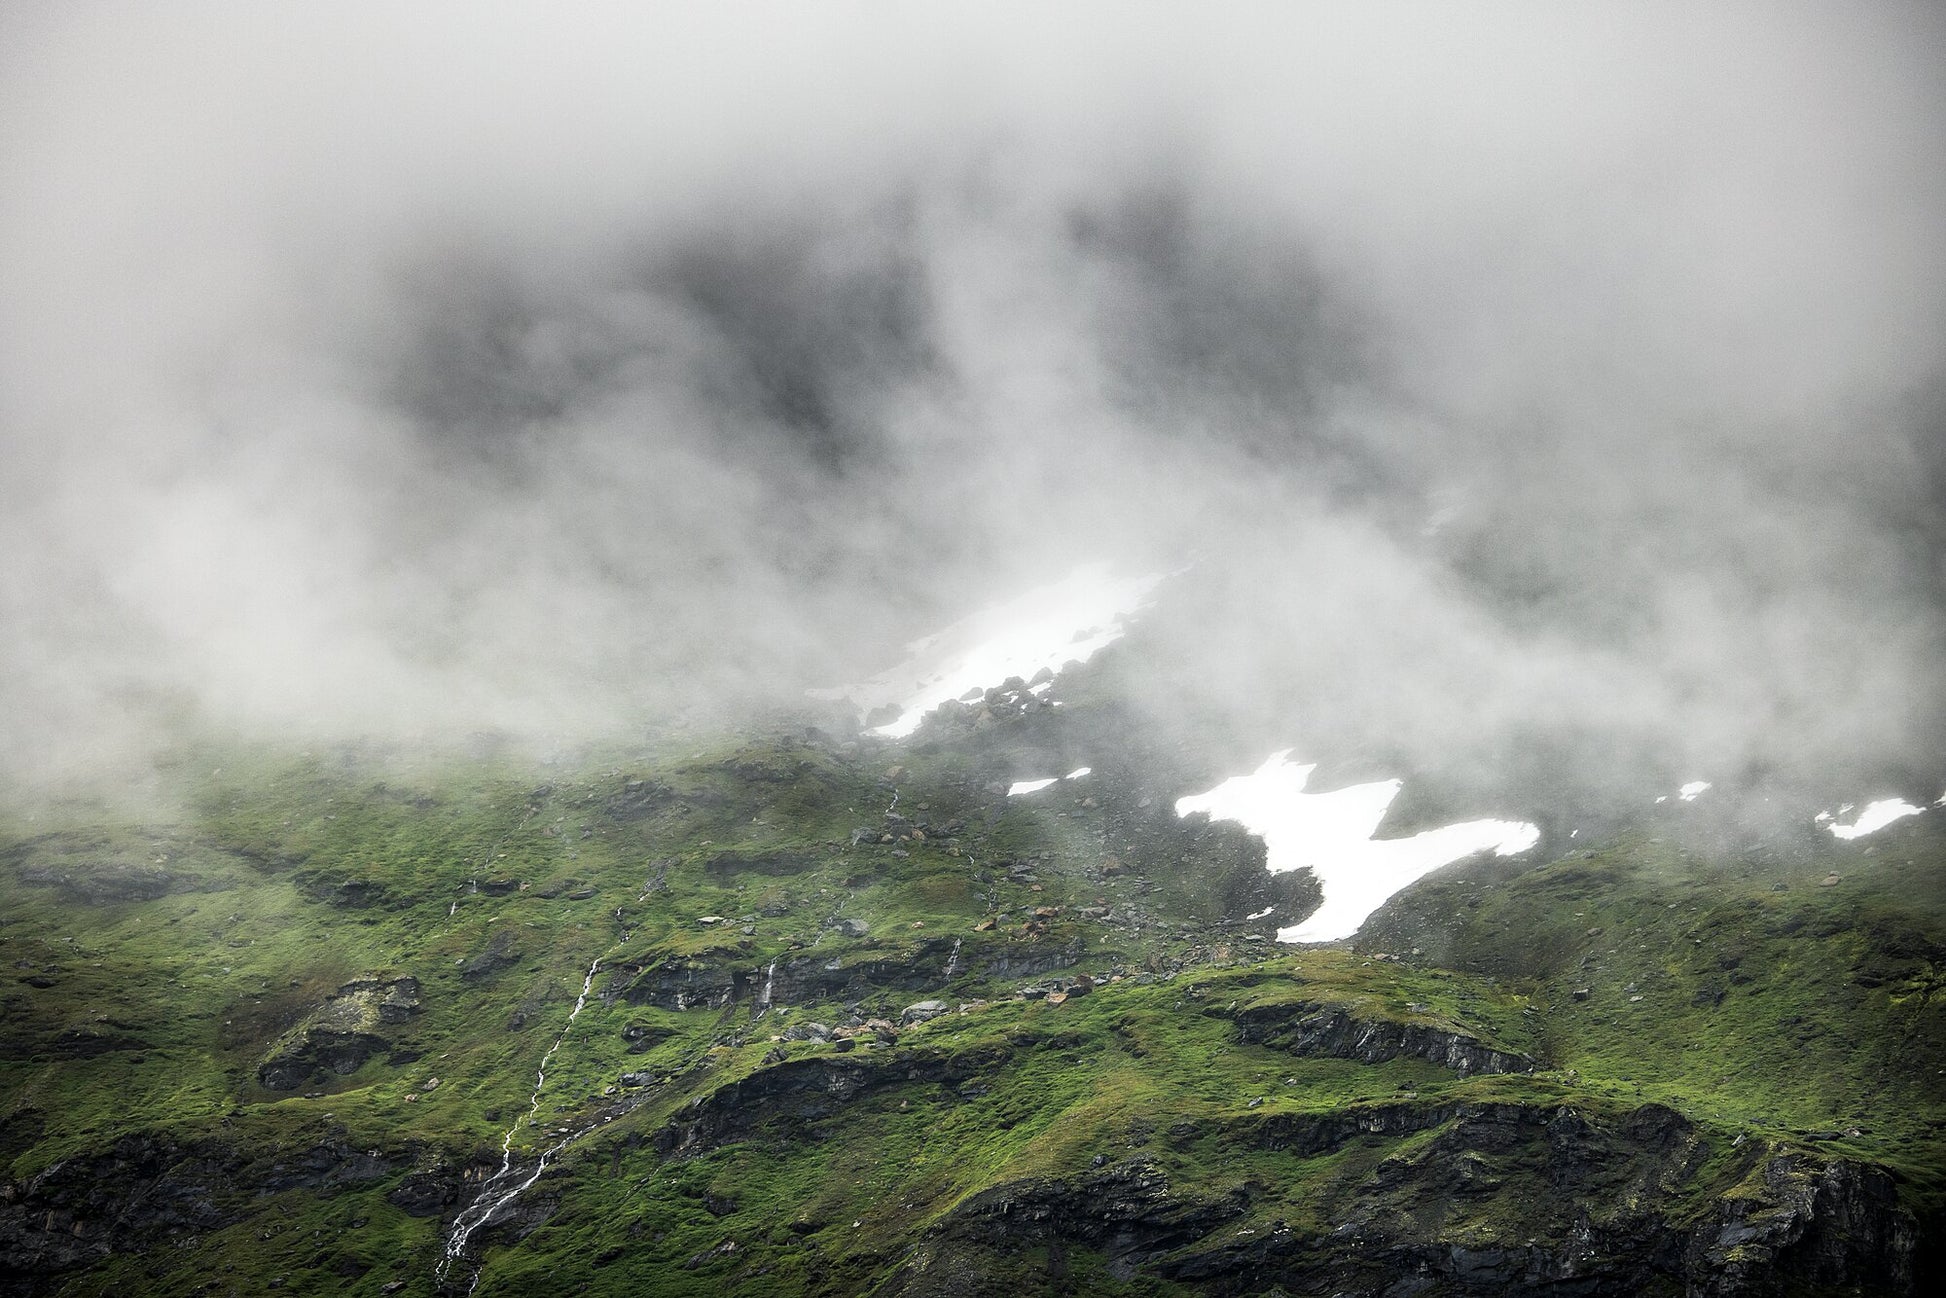 Cloud-shrouded Norwegian mountain peak with meltwater streams and snowy patches.